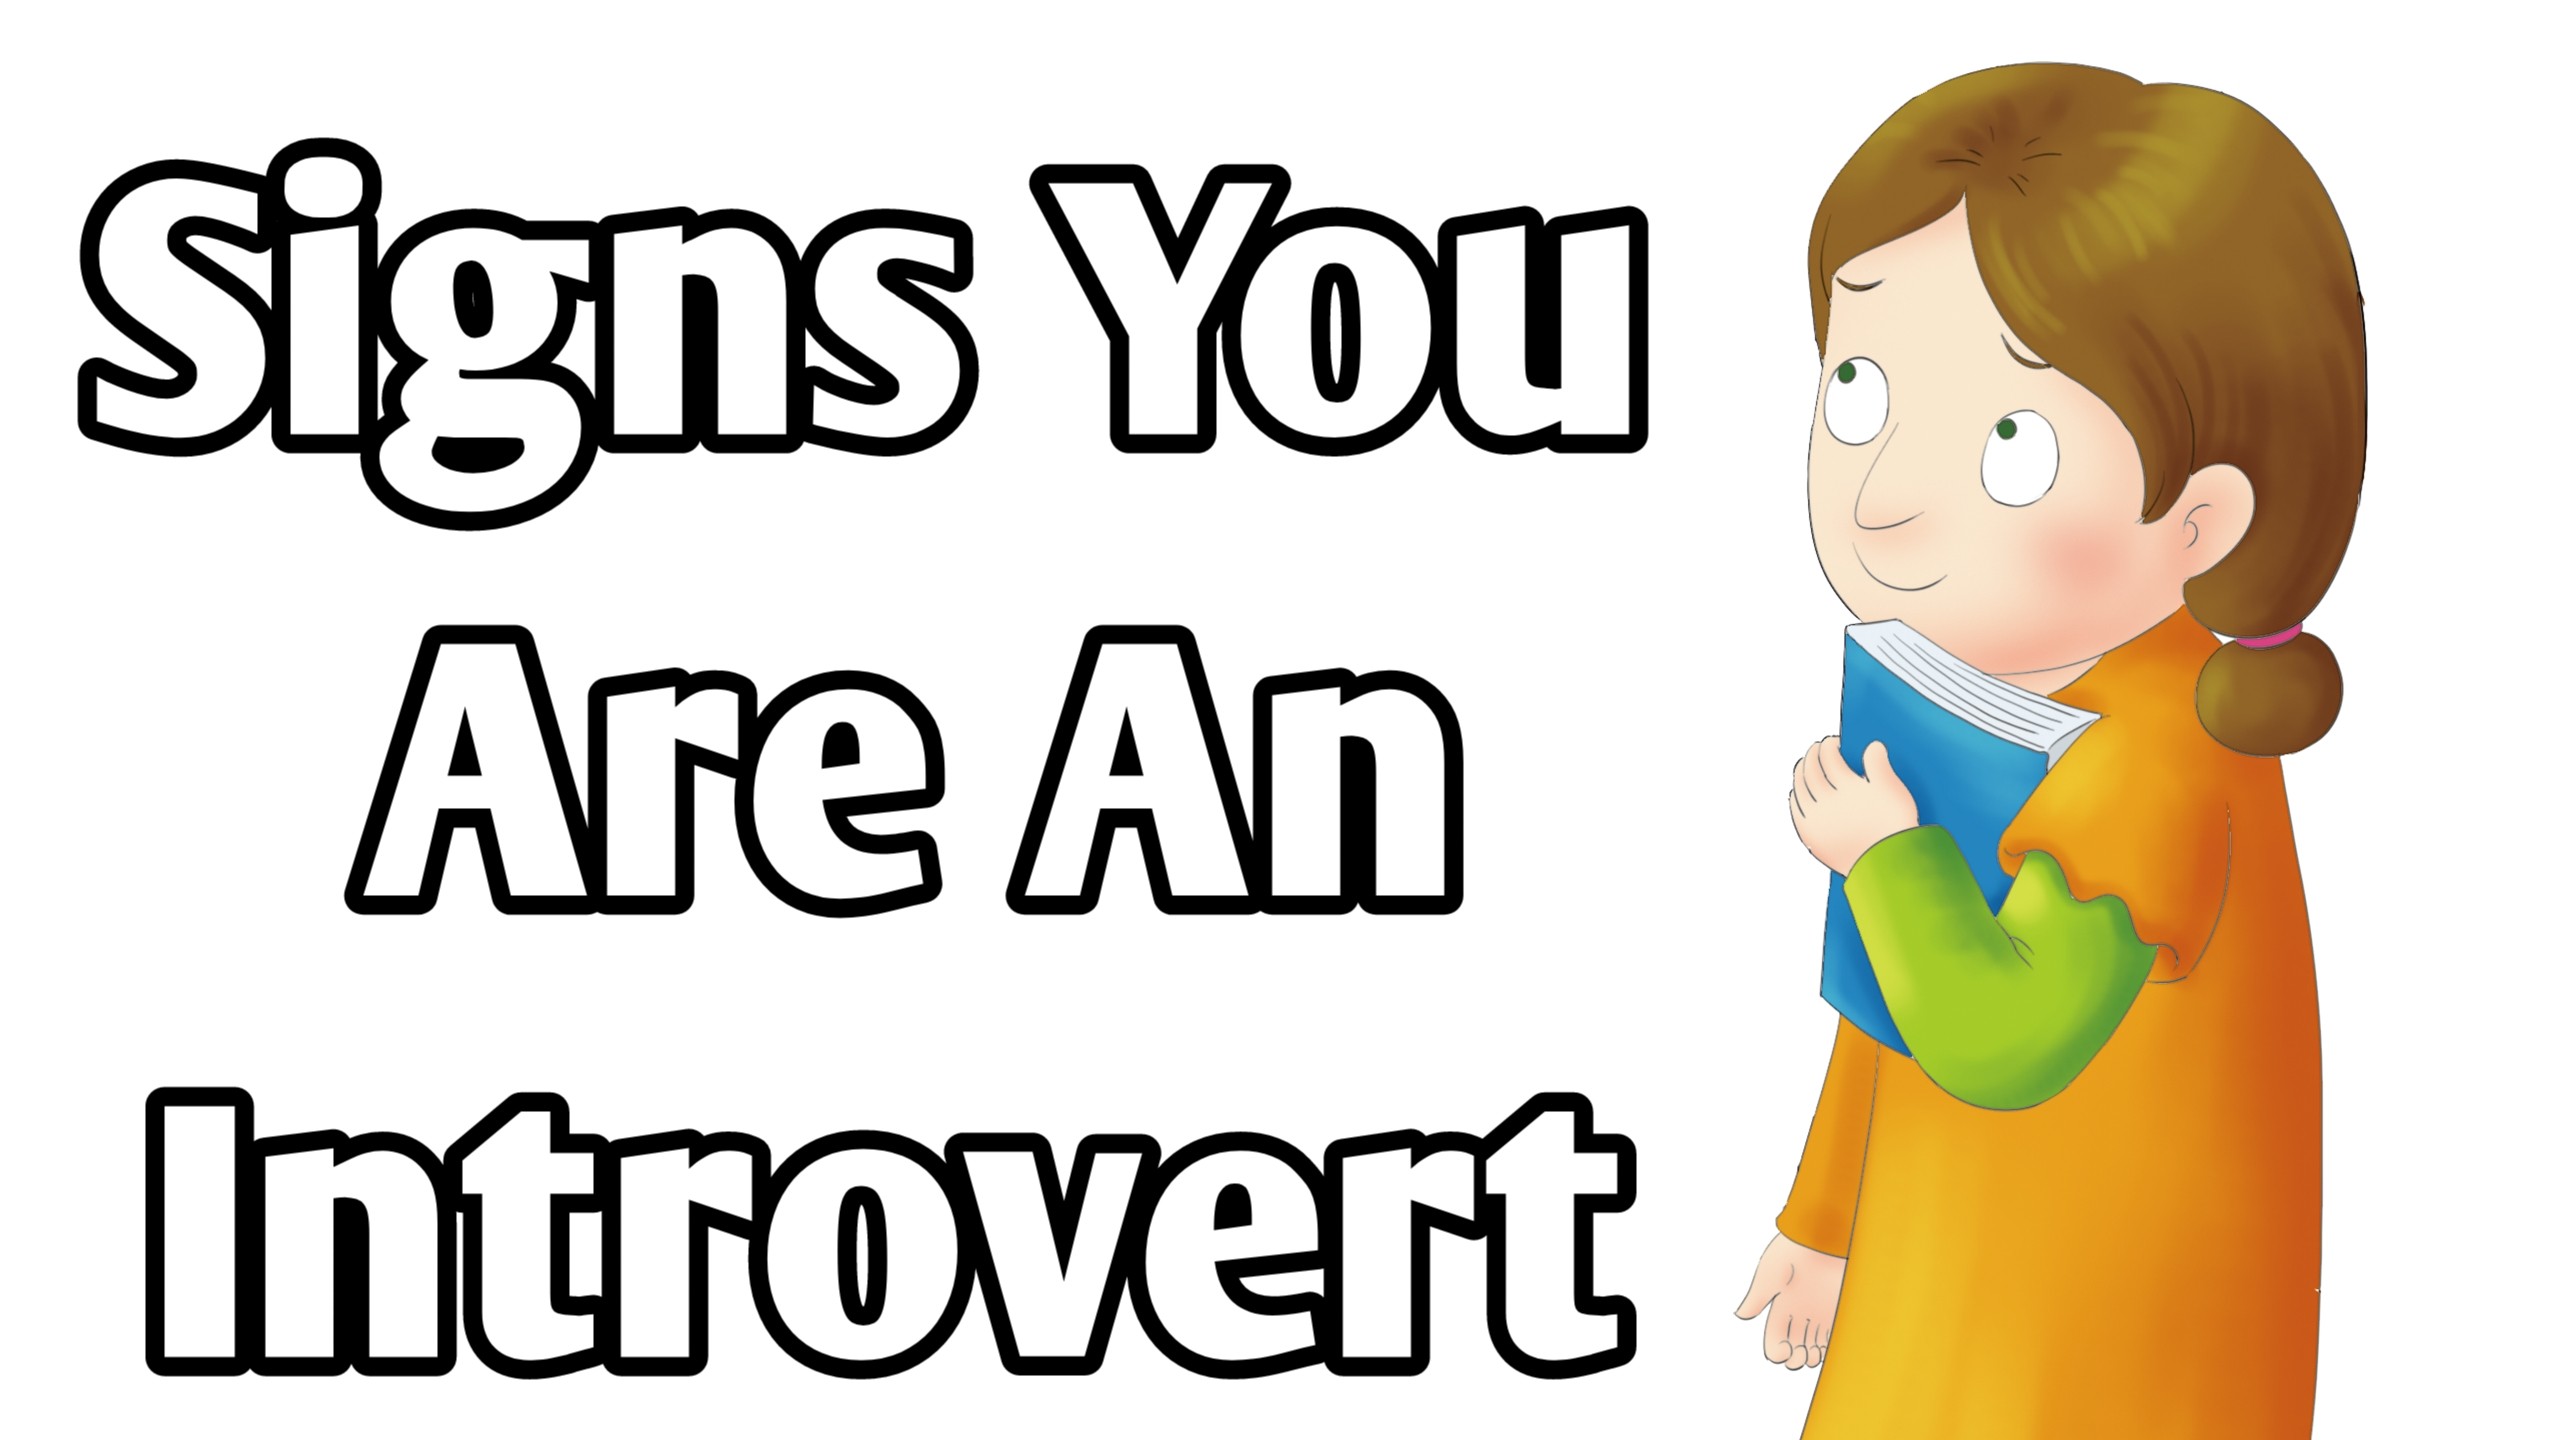 How to Know an Introvert: 11 Signs You are One